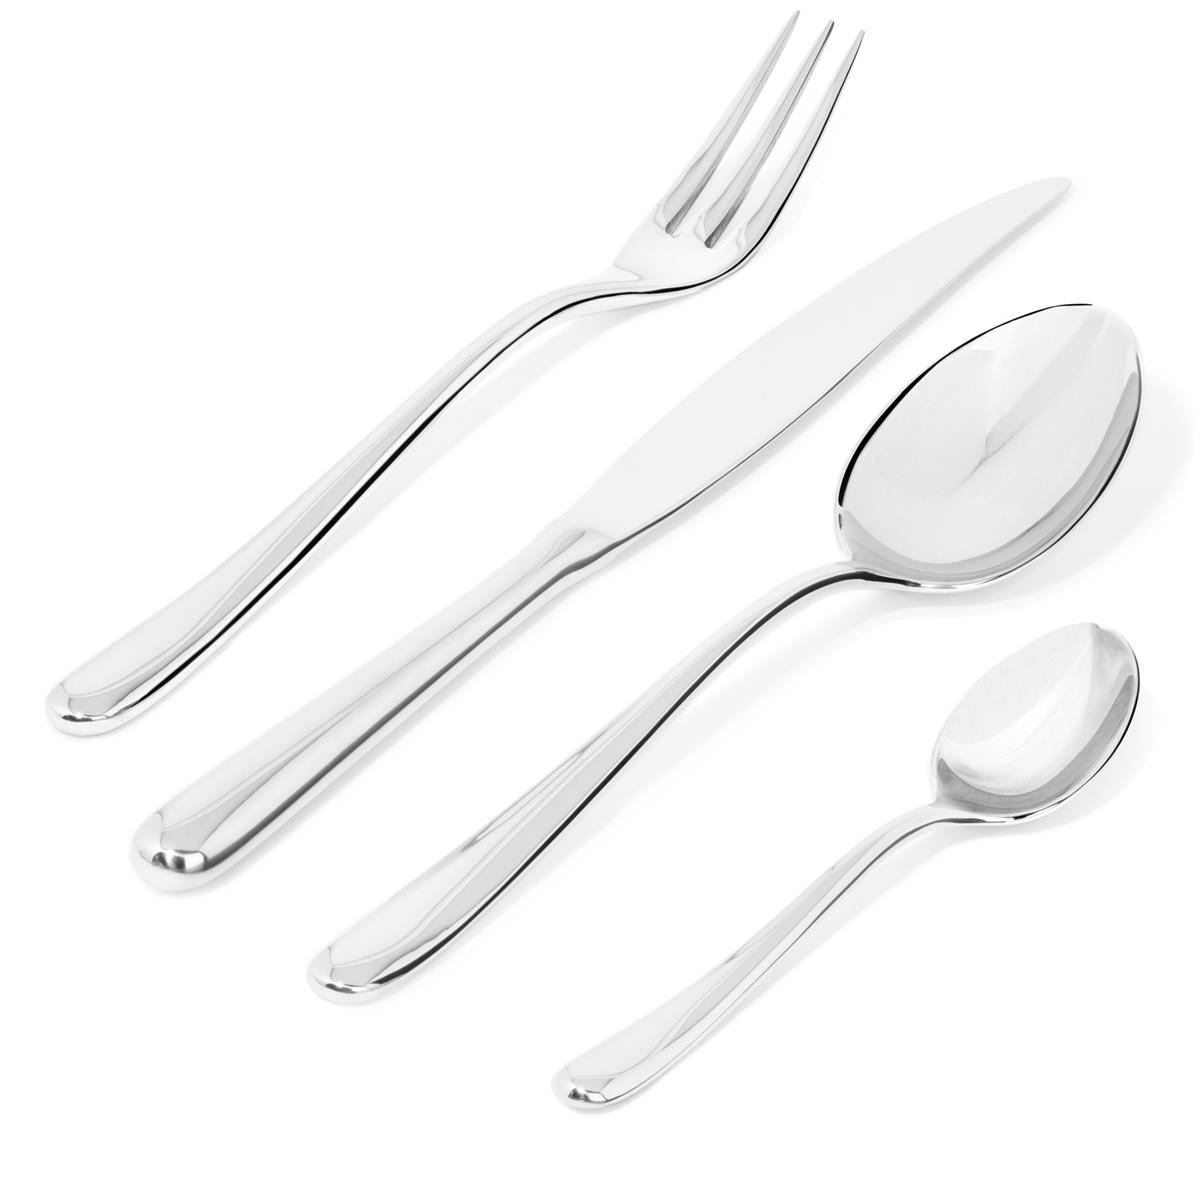 Alessi-Caccia Cutlery set in 18/10 stainless steel